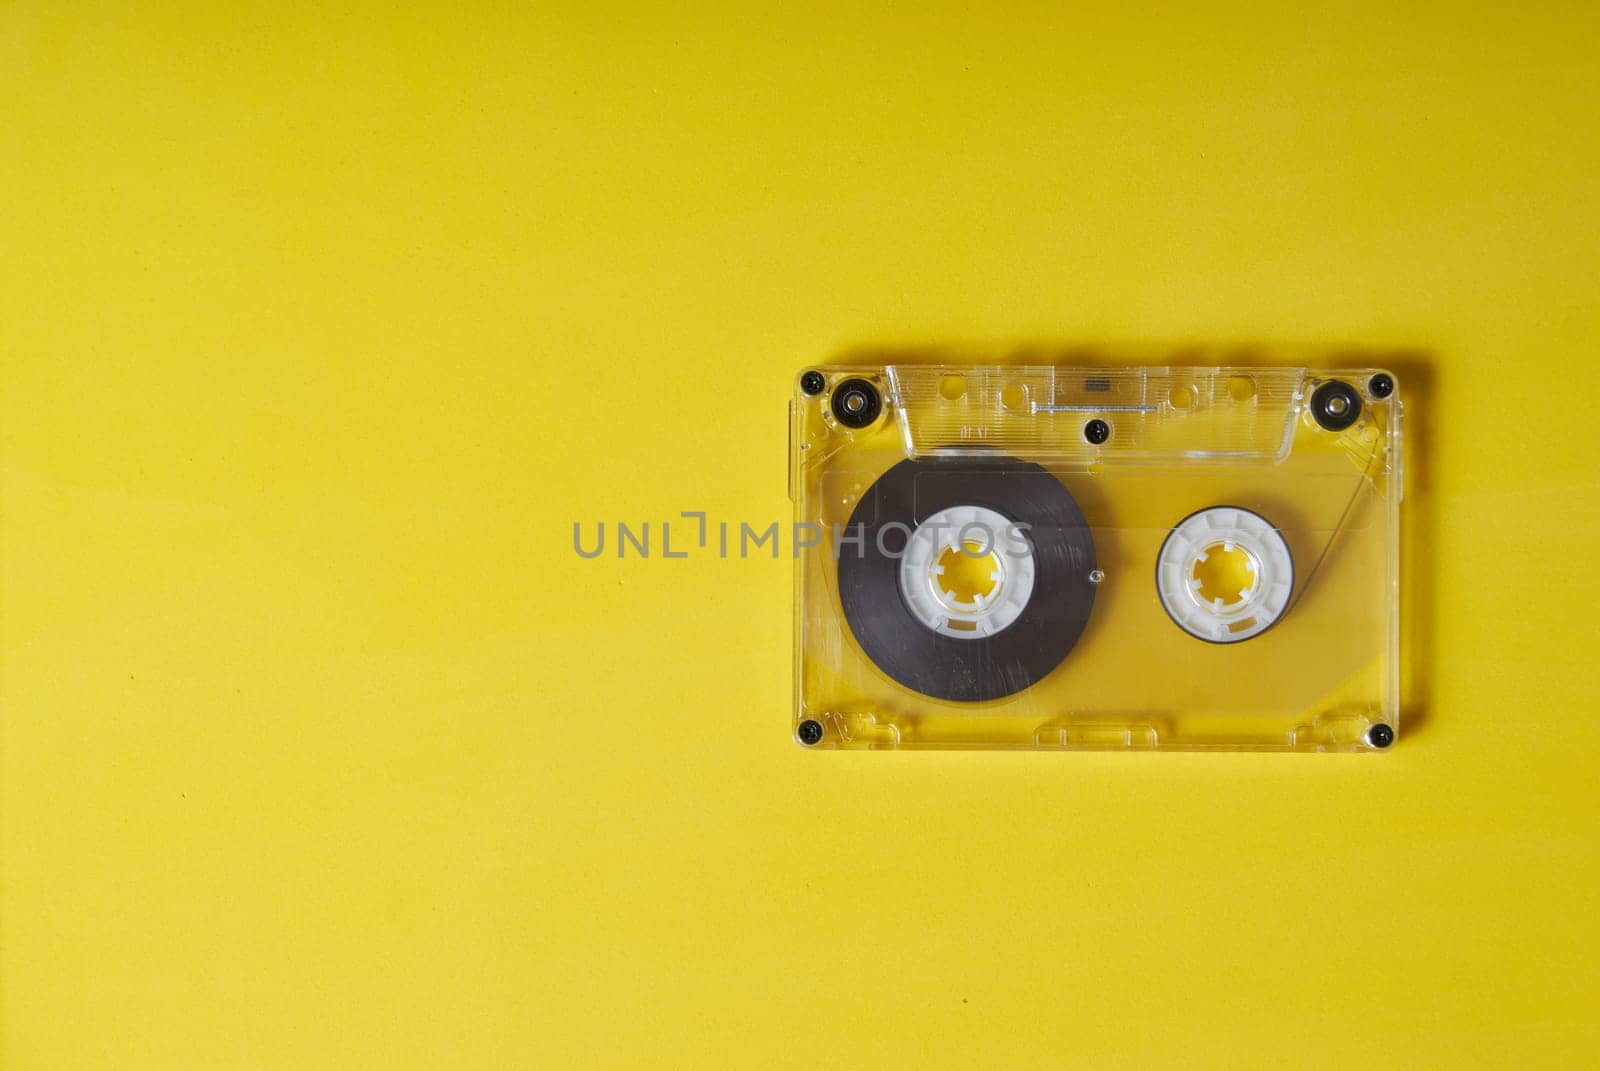 Retro cassette on a yellow background old transparent audio cassette is located on a yellow background